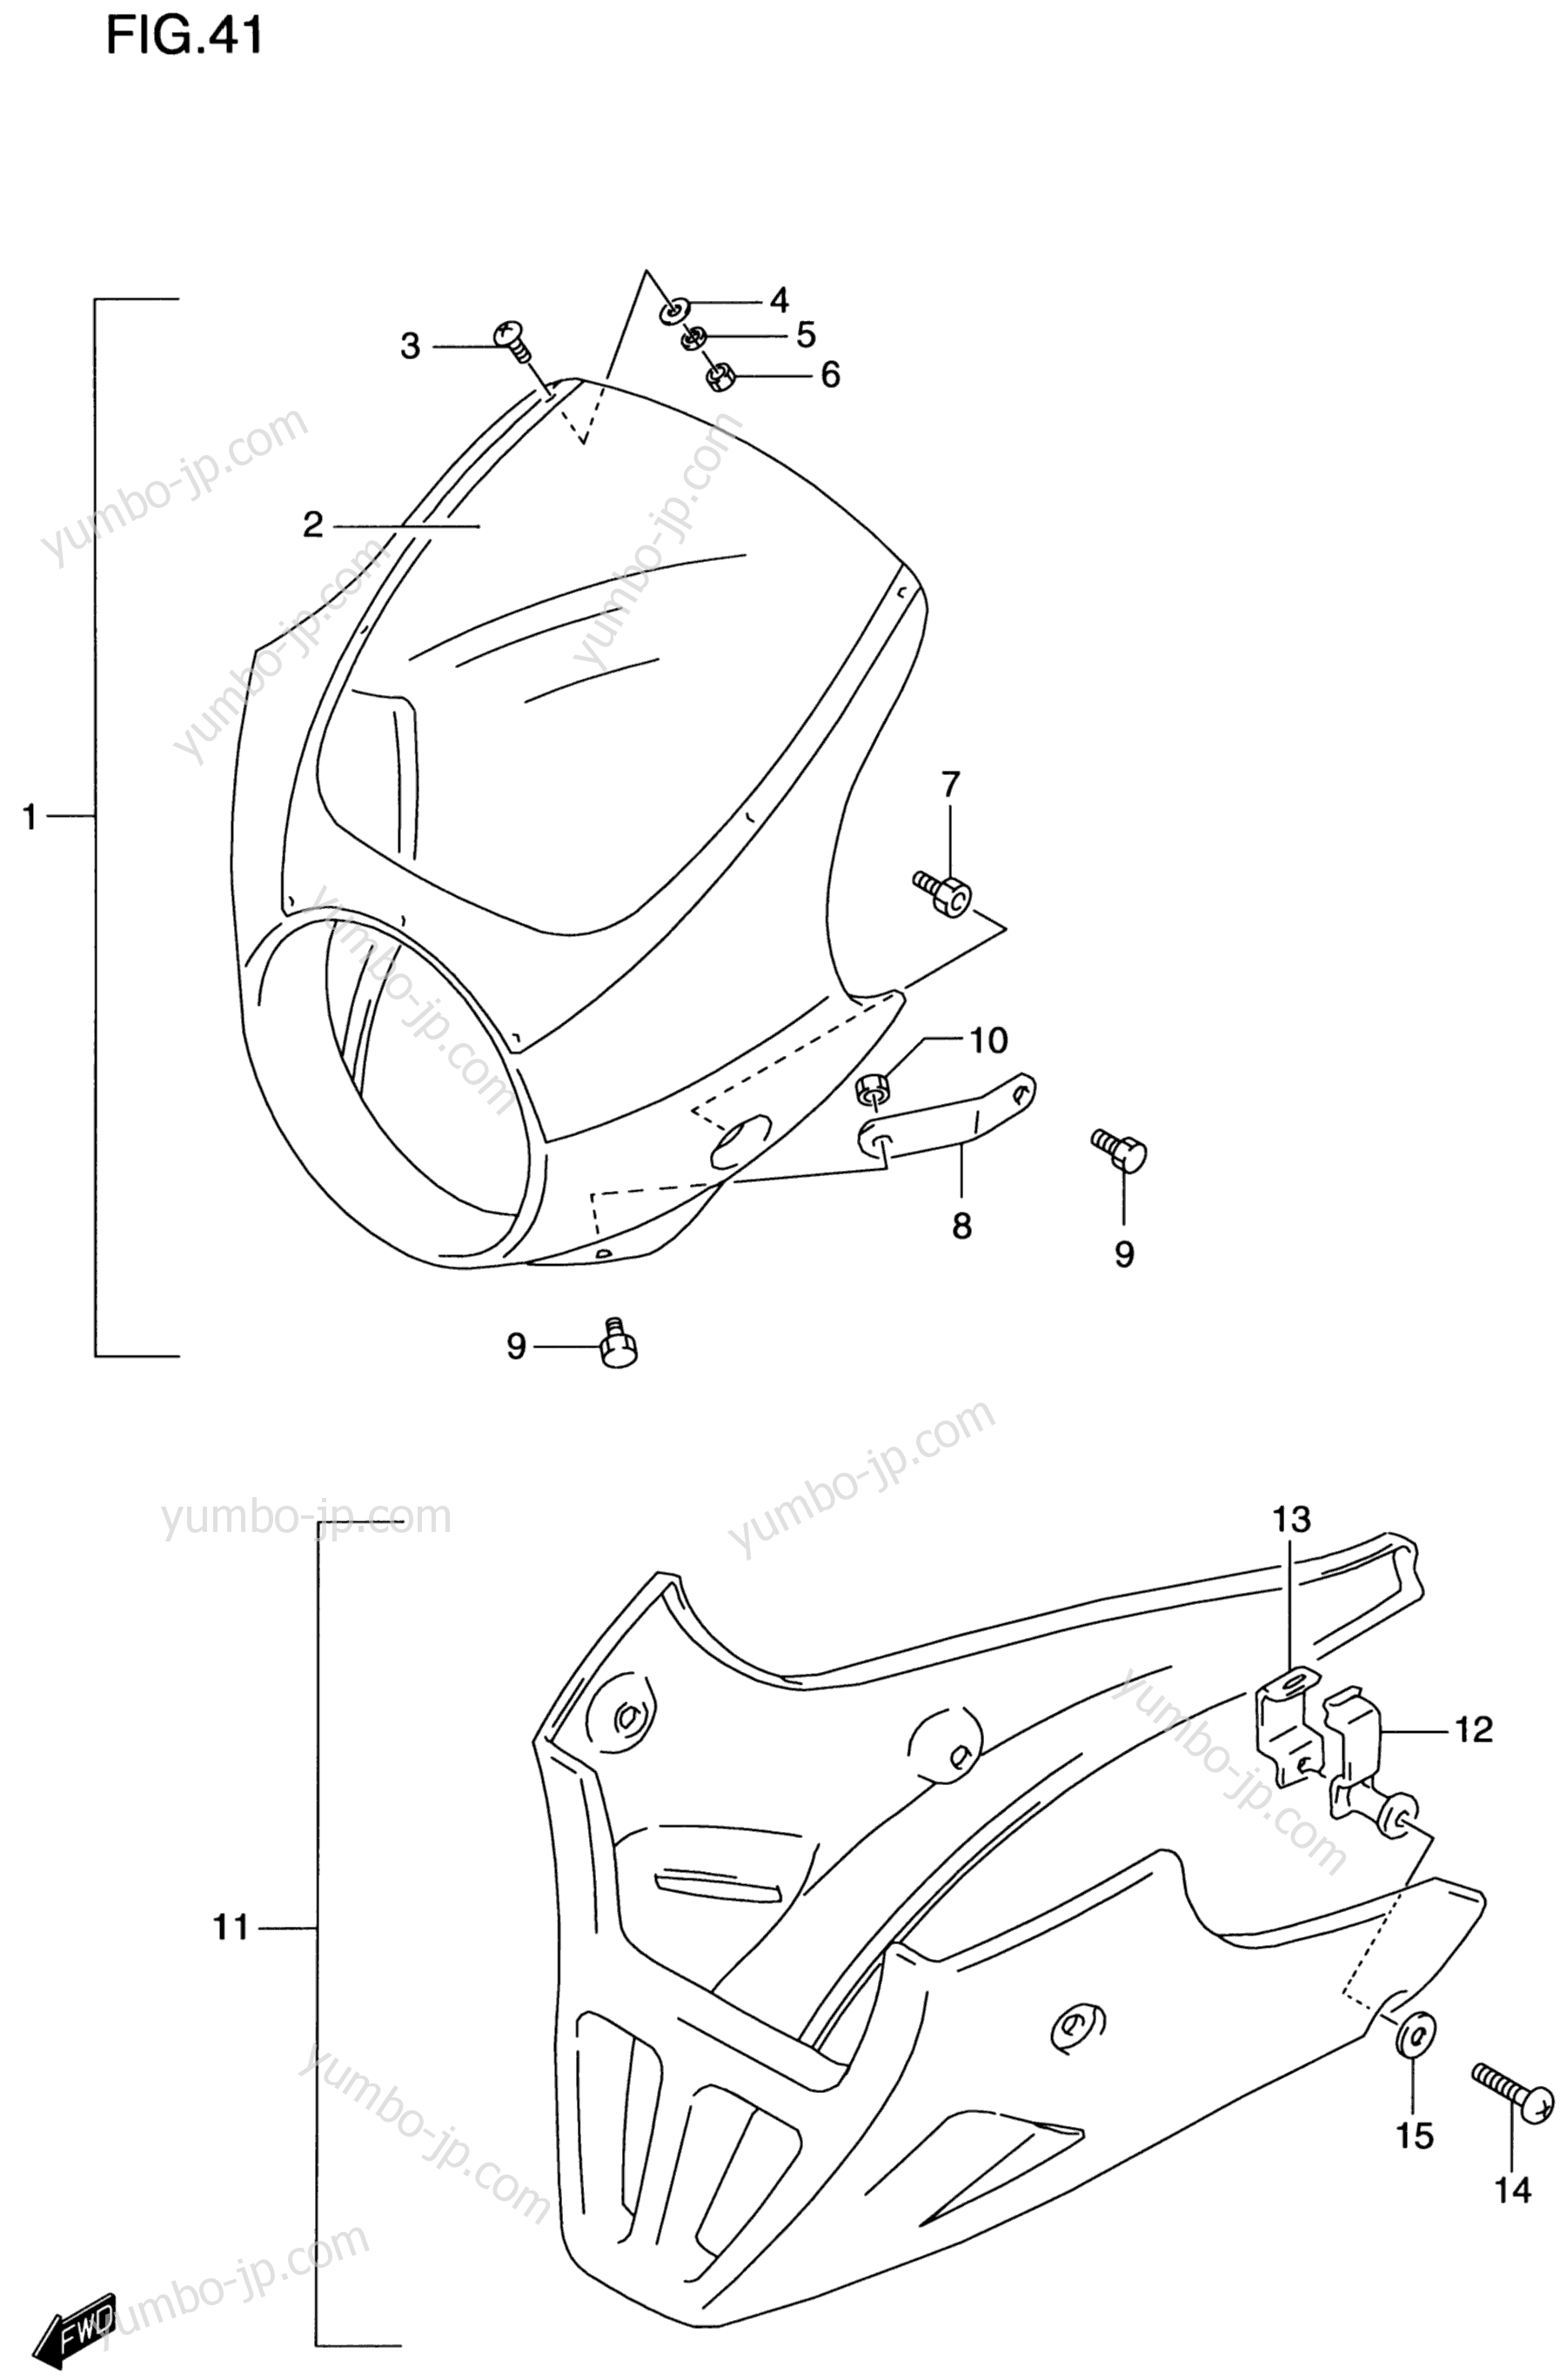 COWLING (OPTIONAL) for motorcycles SUZUKI GS500E 1998 year